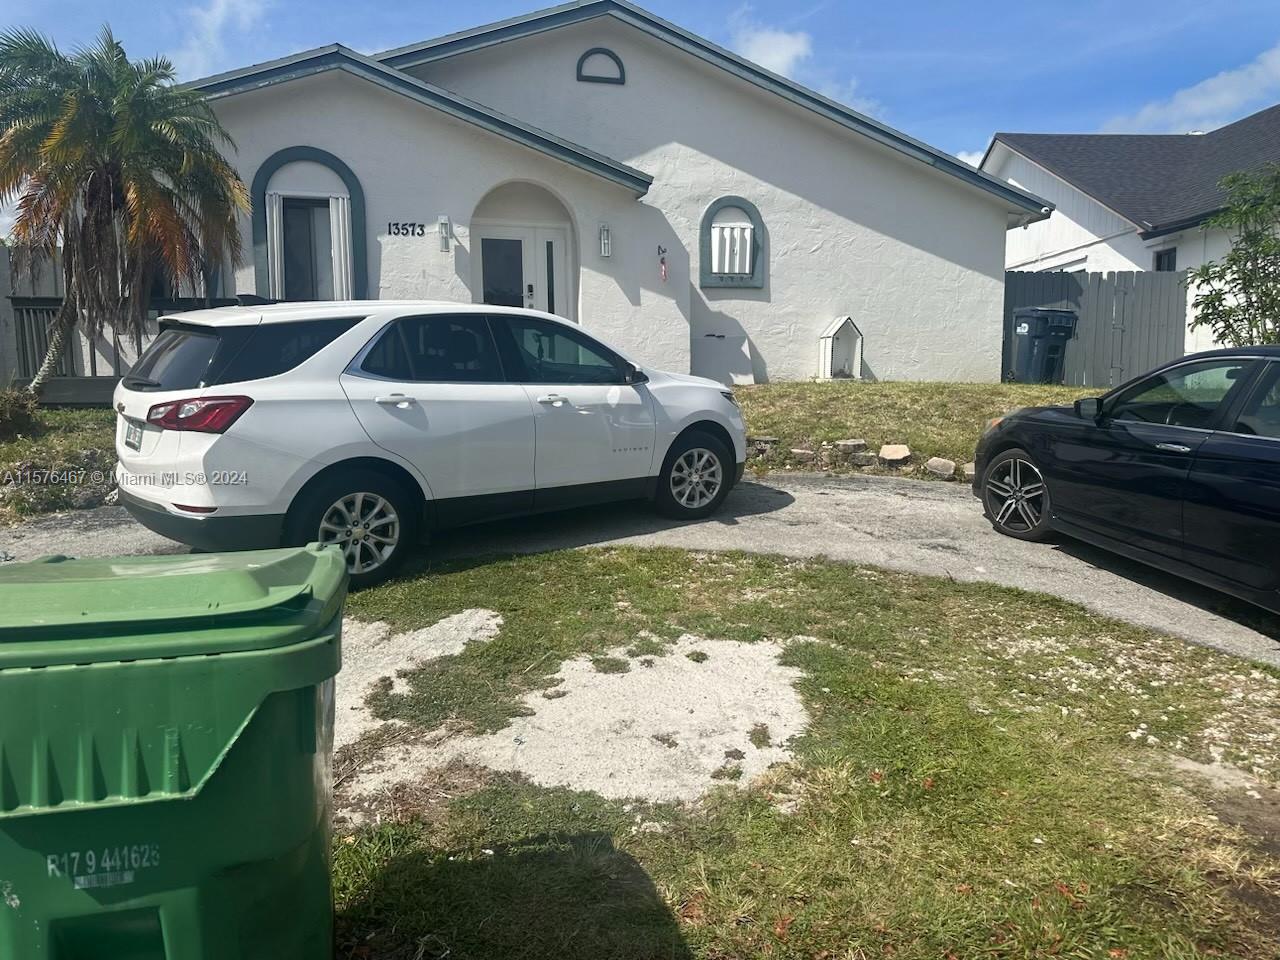 House for Sale in Homestead, FL